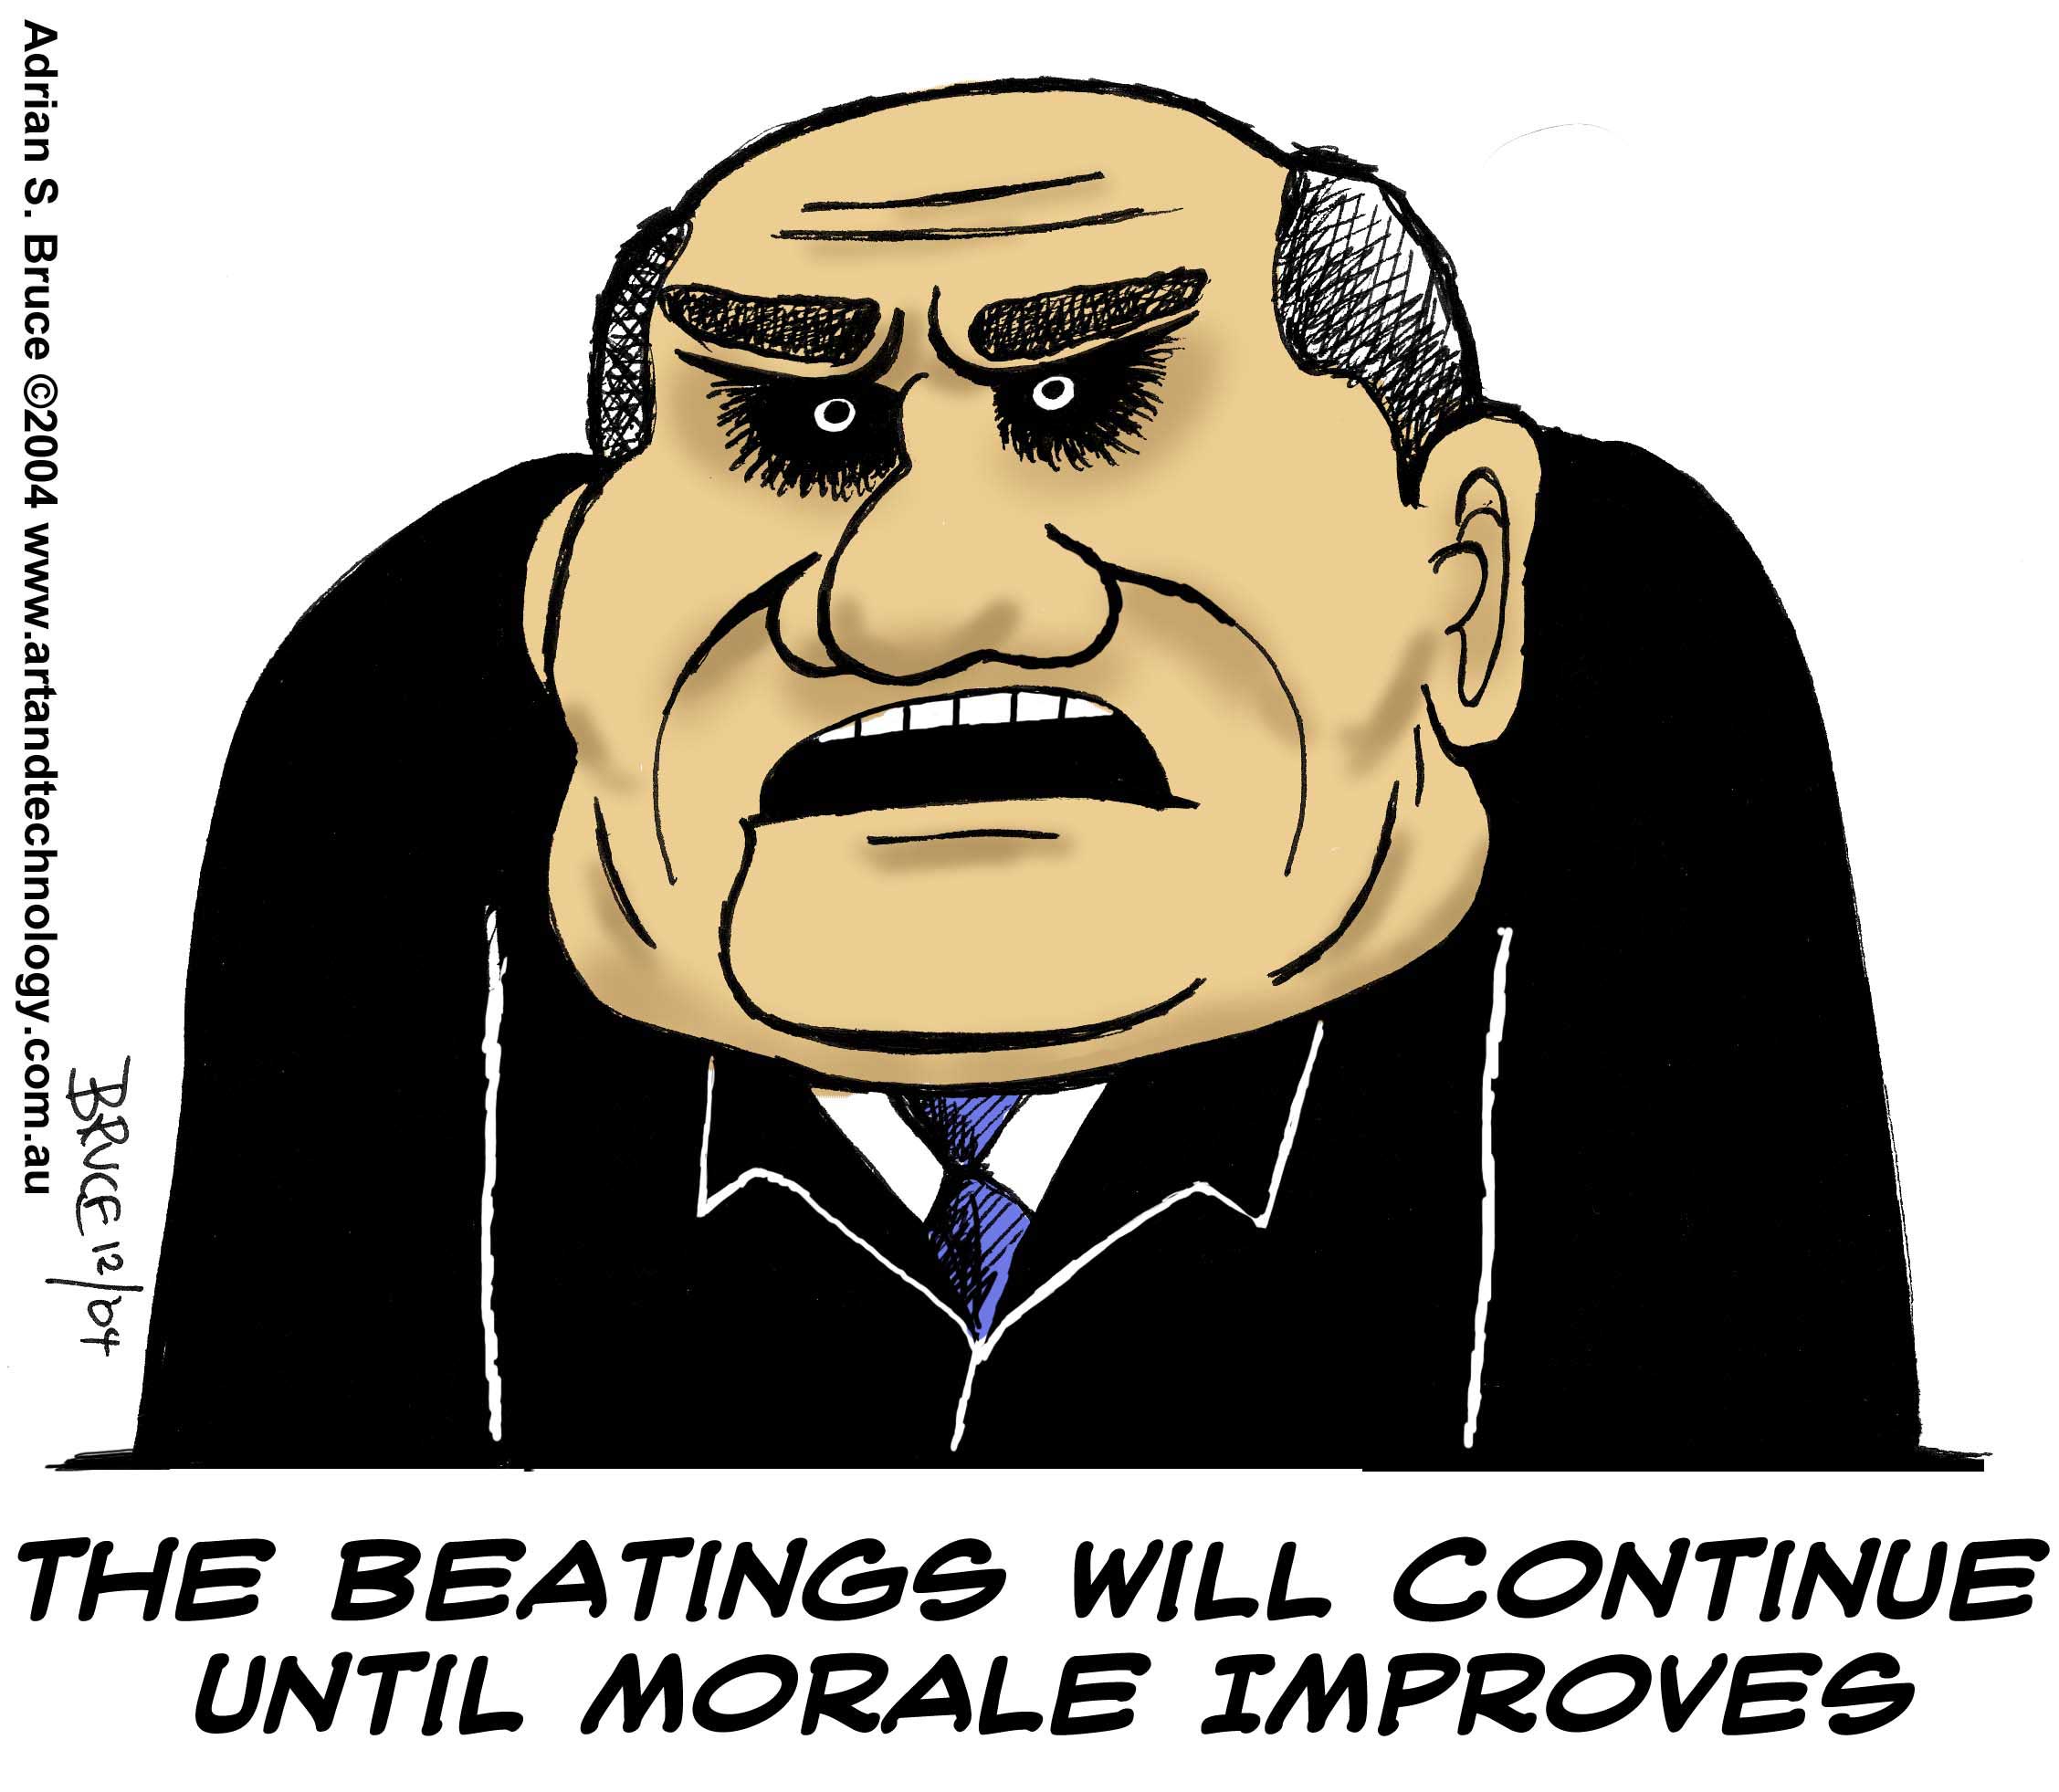 The beatings will continue until morale improves cartoon